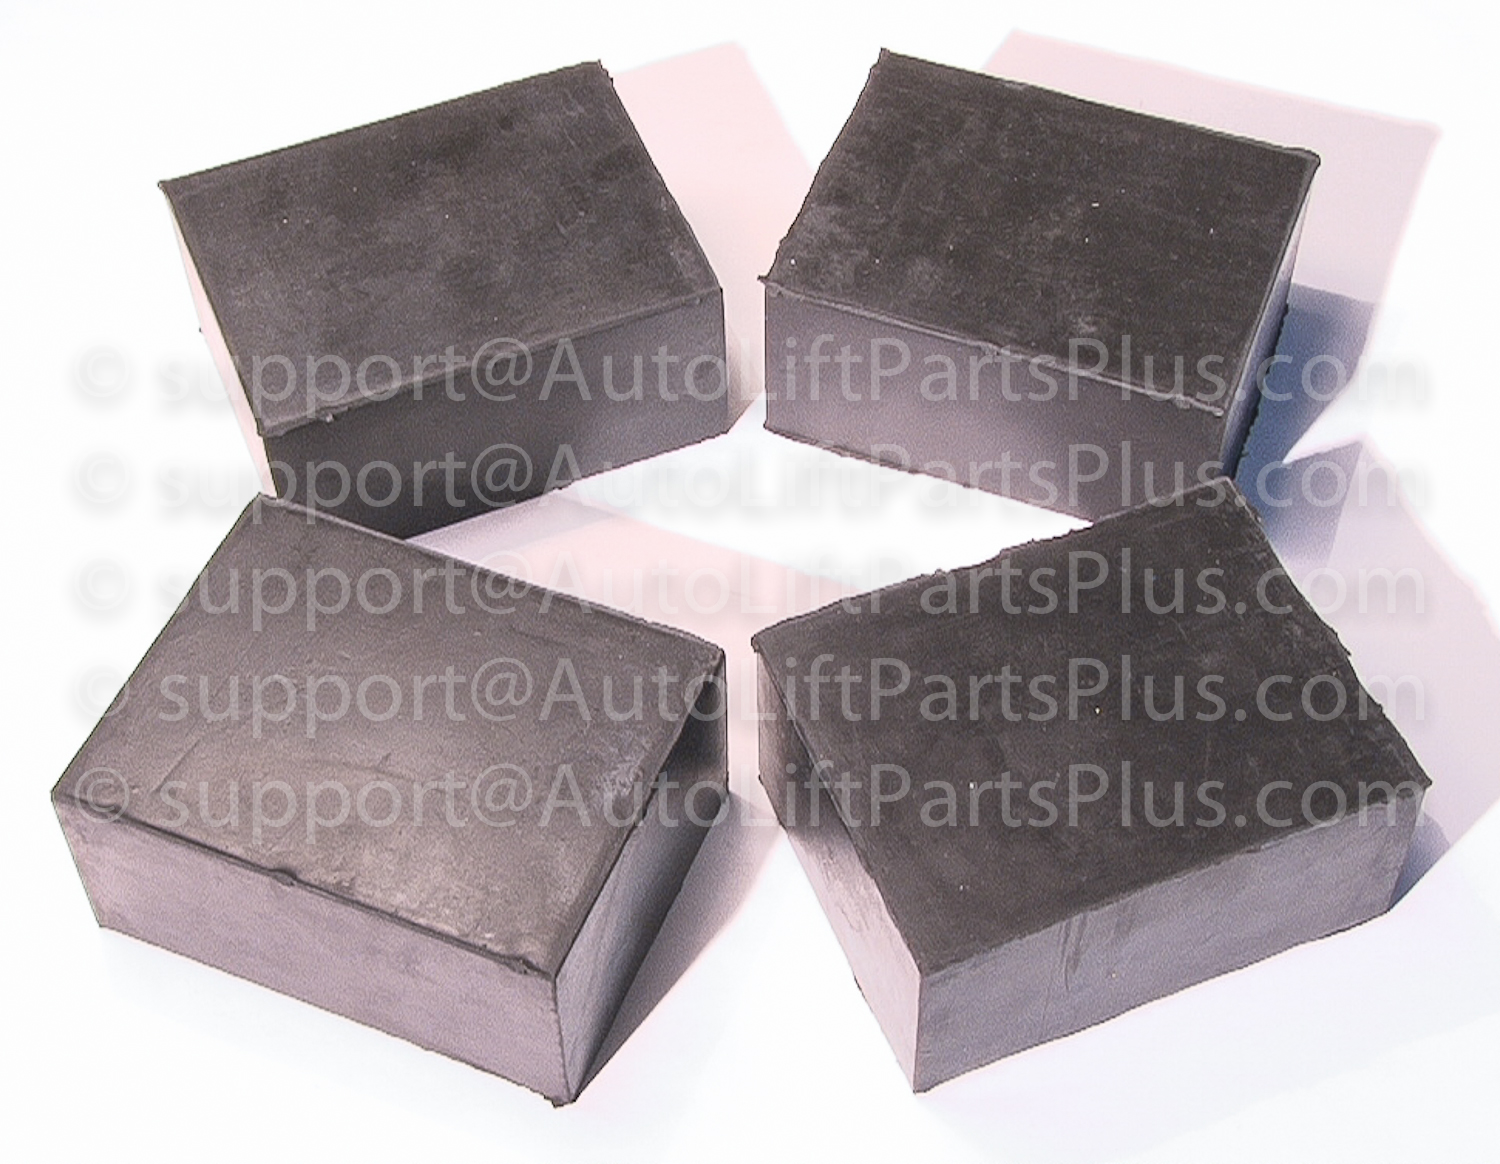 3″ Solid Rubber Stack Blocks(4) for Any Auto Lift or Rolling Jack